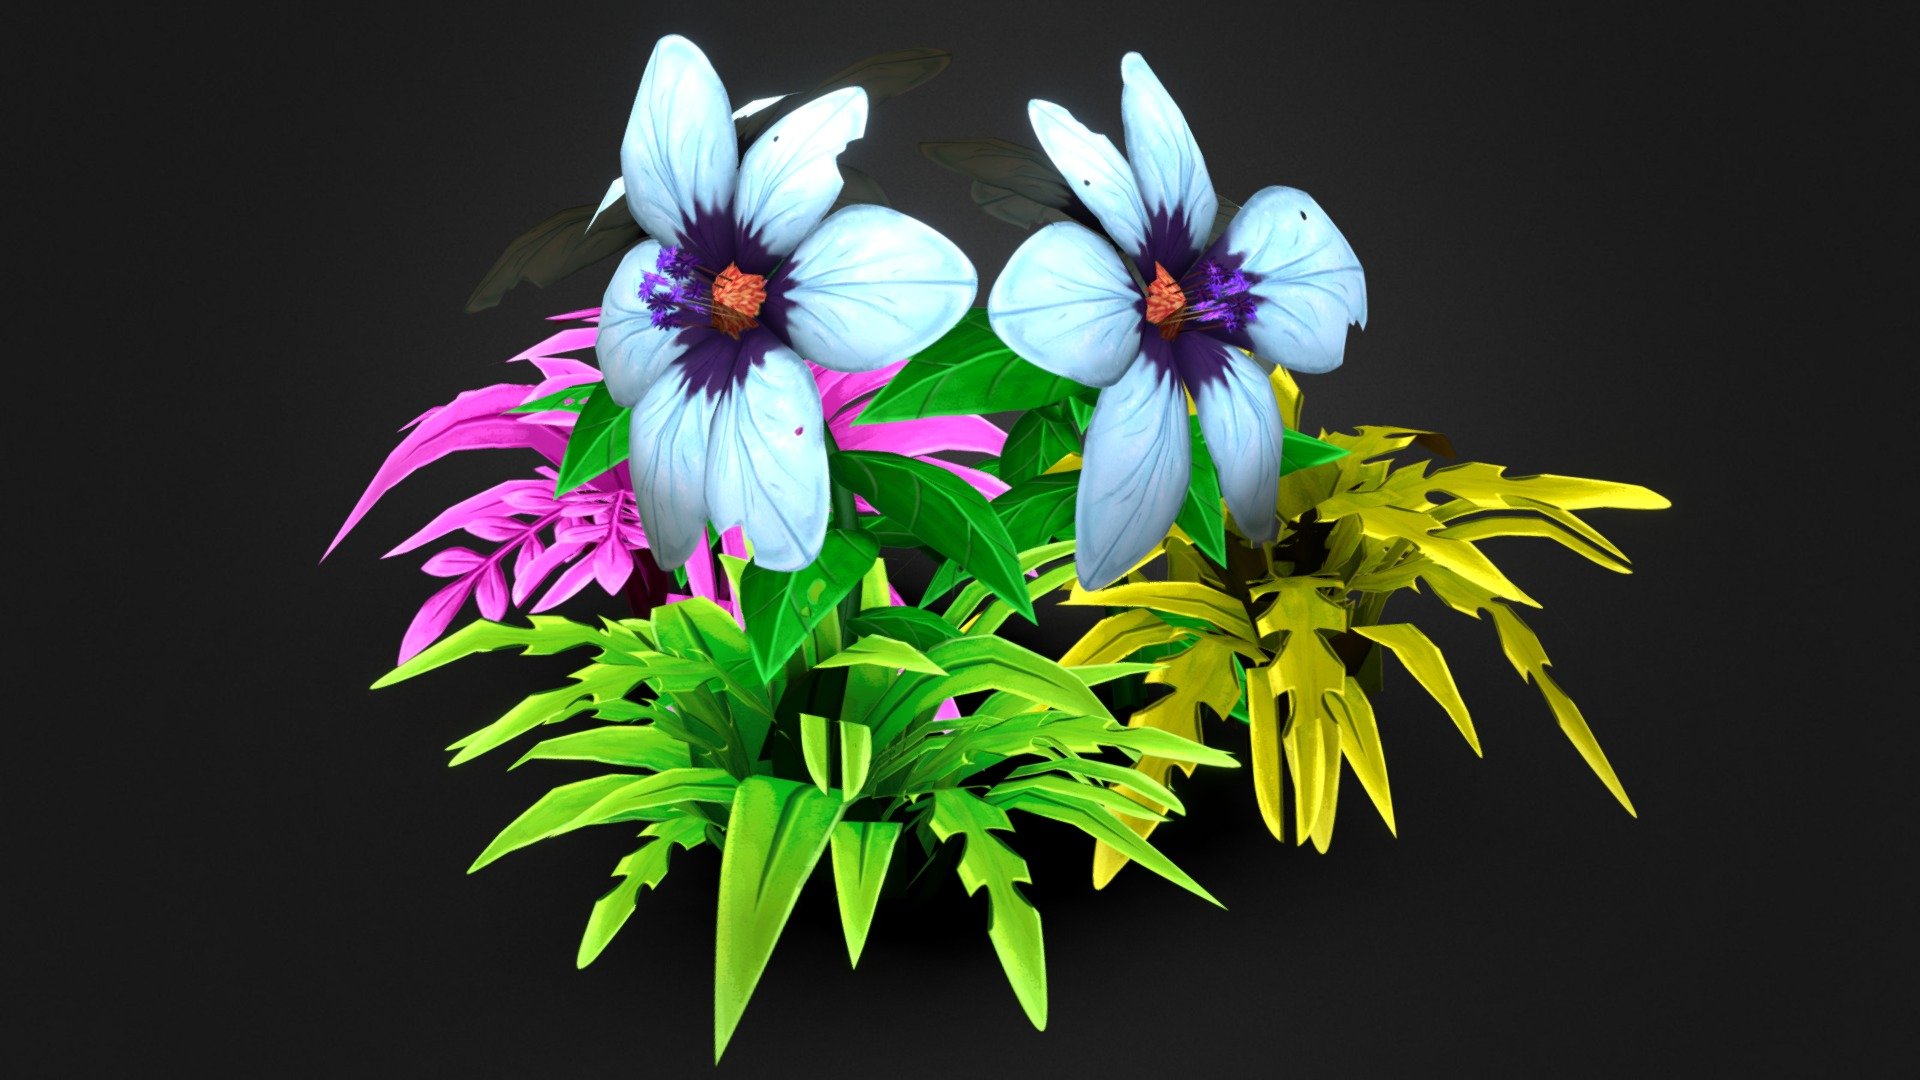 Jardín low poly, garden low poly, texture hand painted, hecho con Autodesk Maya y Adobe Photoshop
https://www.behance.net/vicdibuja - JARDÍN LOW POLY - Download Free 3D model by Vic dibuja (@vicdibuja) 3d model